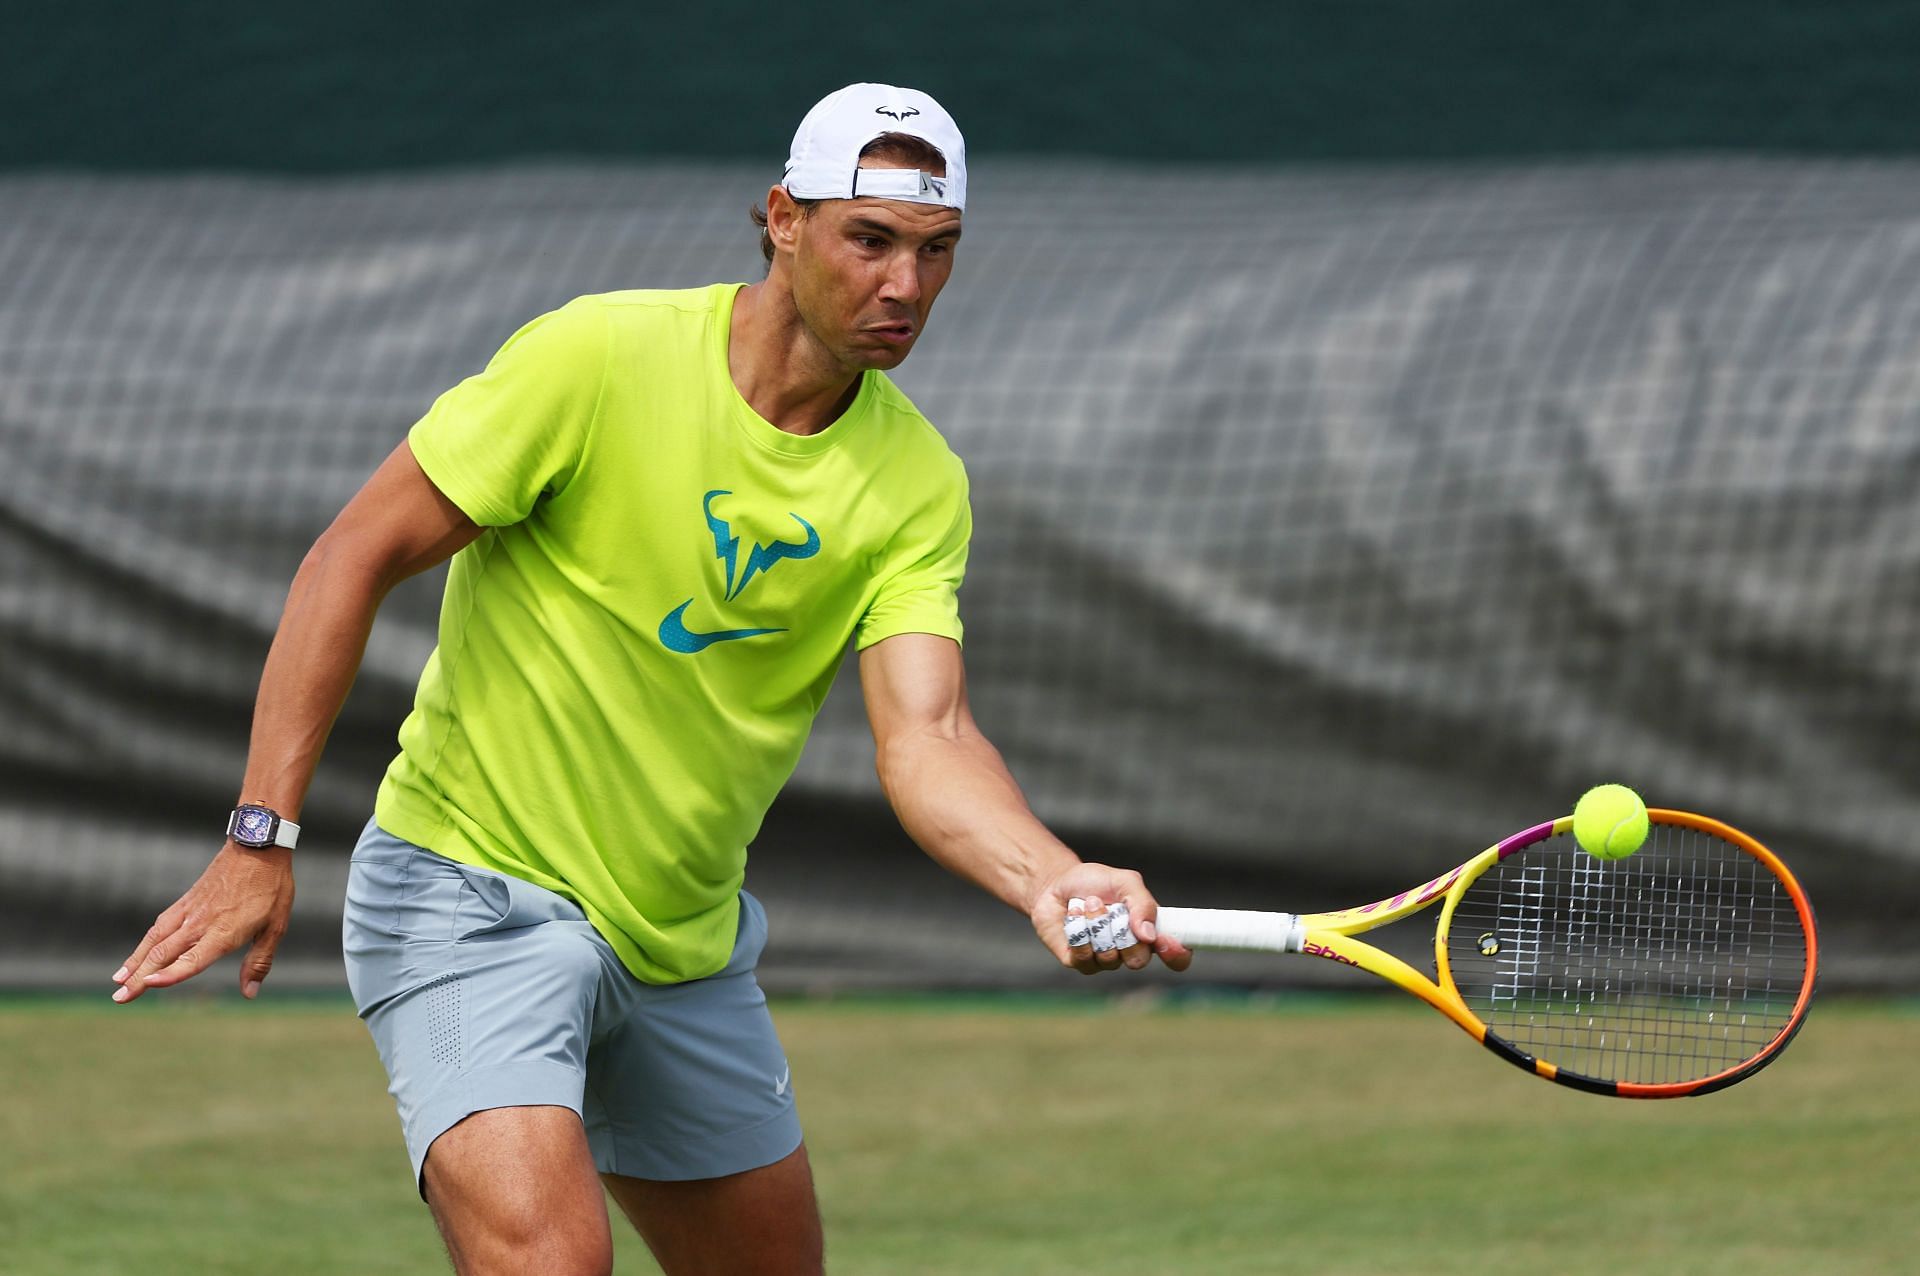 Rafael Nadal takes on Francisco Cerundolo in the first round of Wimbledon